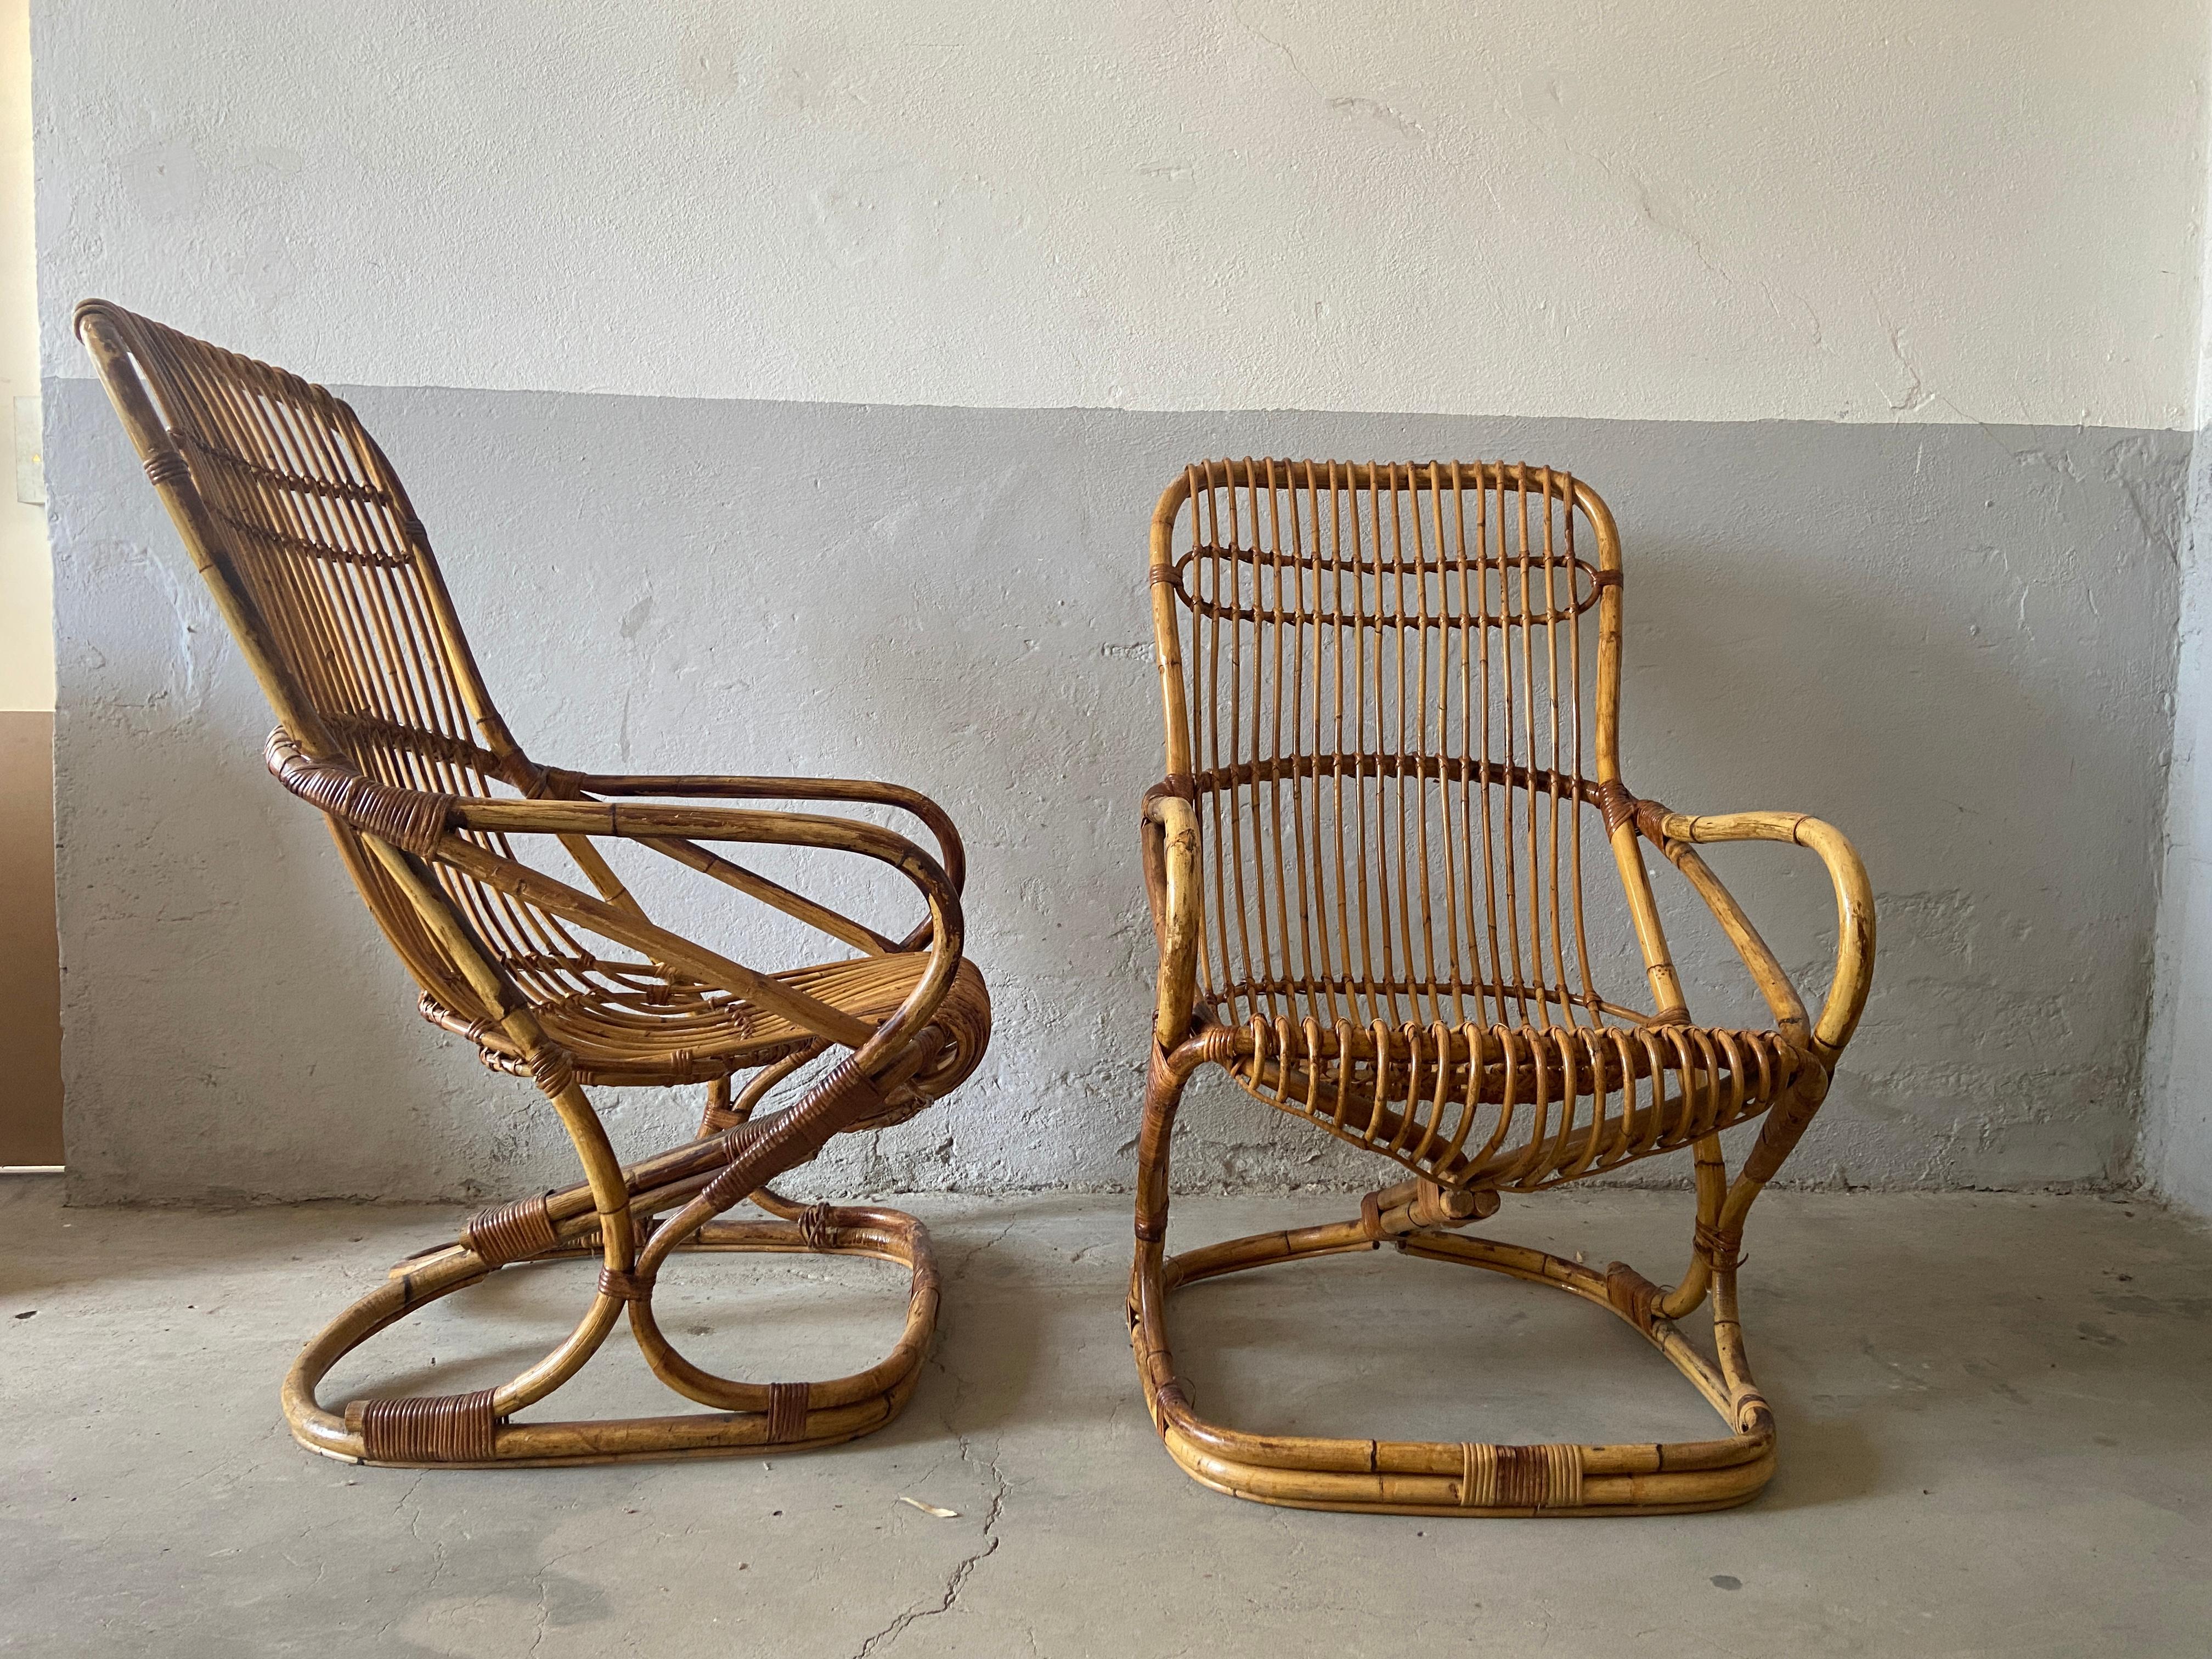 Mid-Century Modern pair of Italian bamboo and rattan armchairs in the style of Tito Agnoli. 1960s
The set is in really good vintage condition with a wonderful patina.
Wear consistent with age and use.